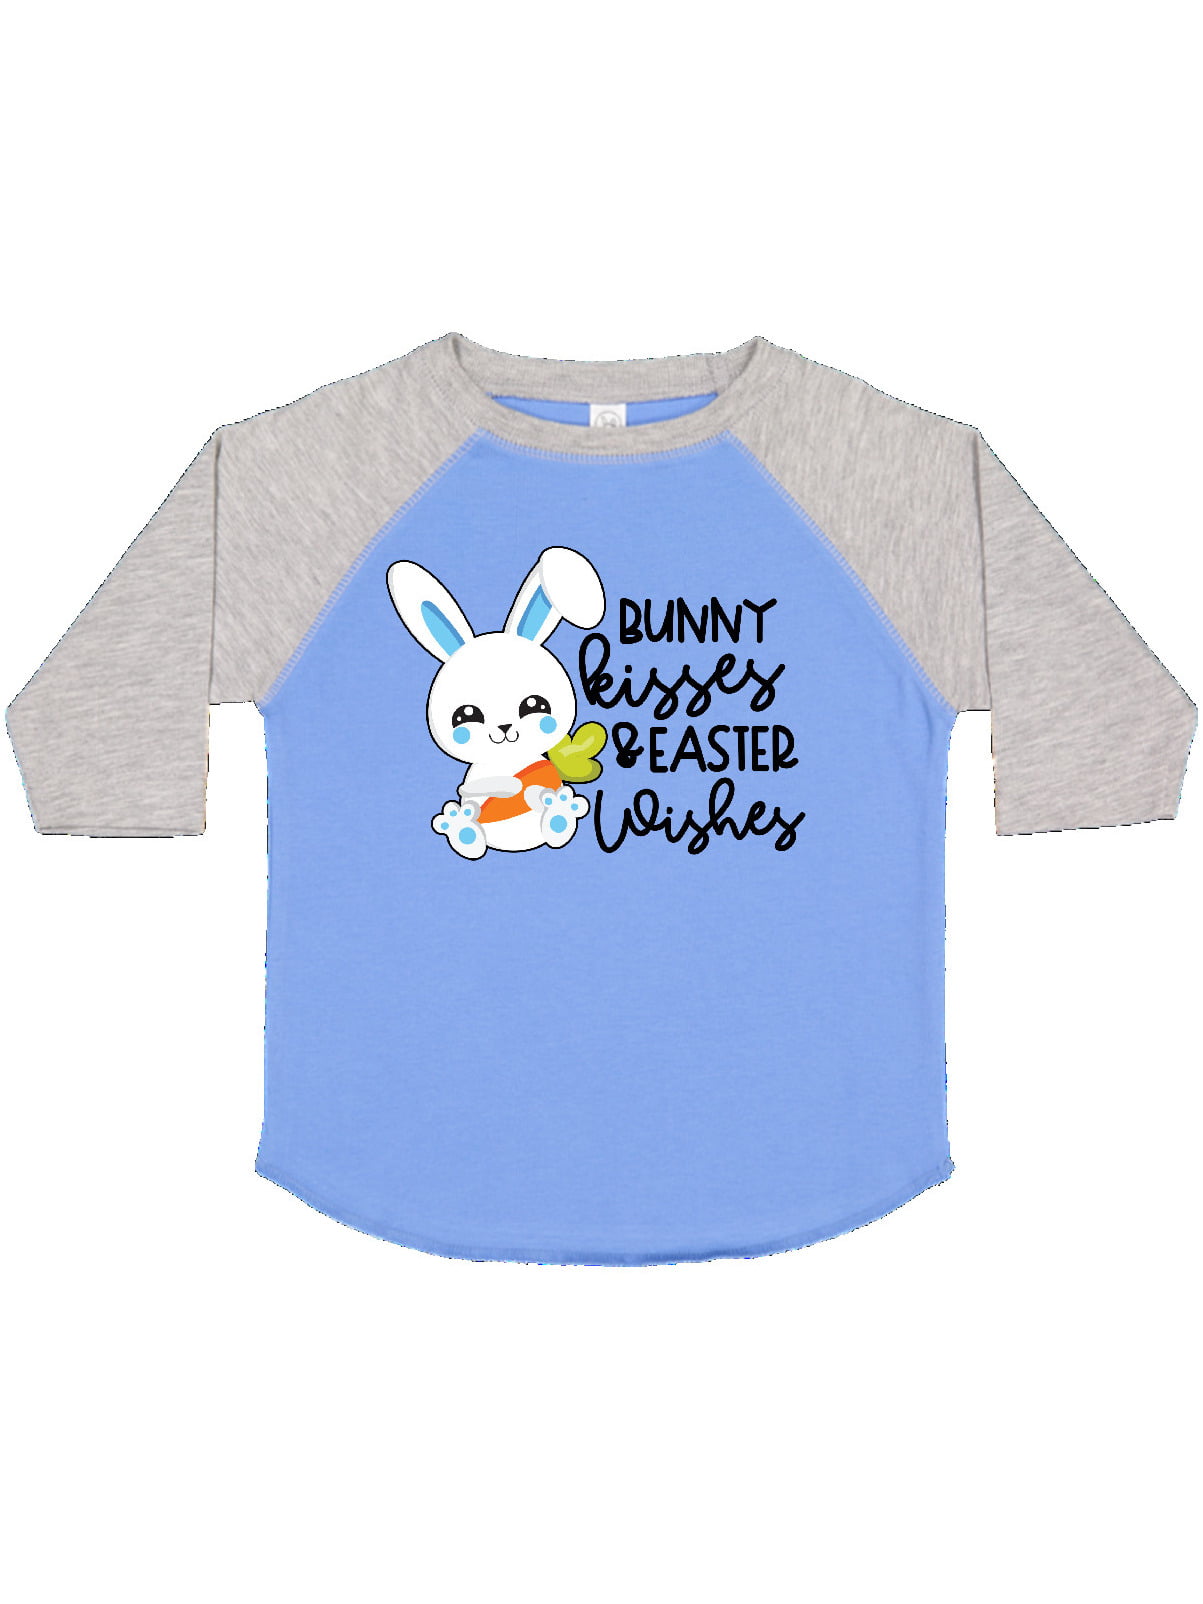 inktastic Easter Wishes Bunny Kisses Toddler Long Sleeve T-Shirt